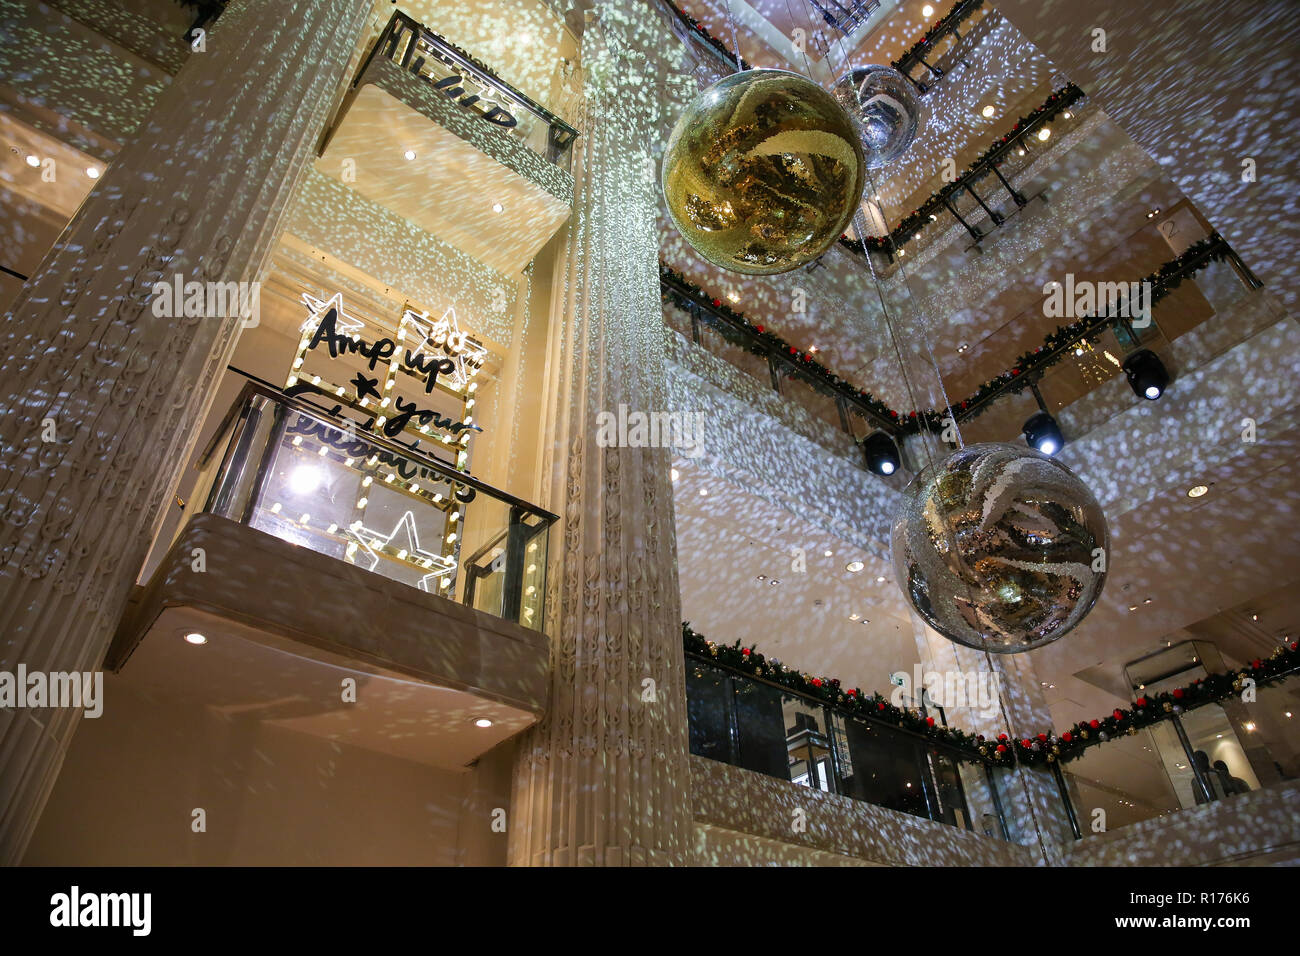 Interior view of Selfridges. Selfridges on Oxford Street, London is decorated with large glitter balls and Christmas lights for the festive season. Stock Photo